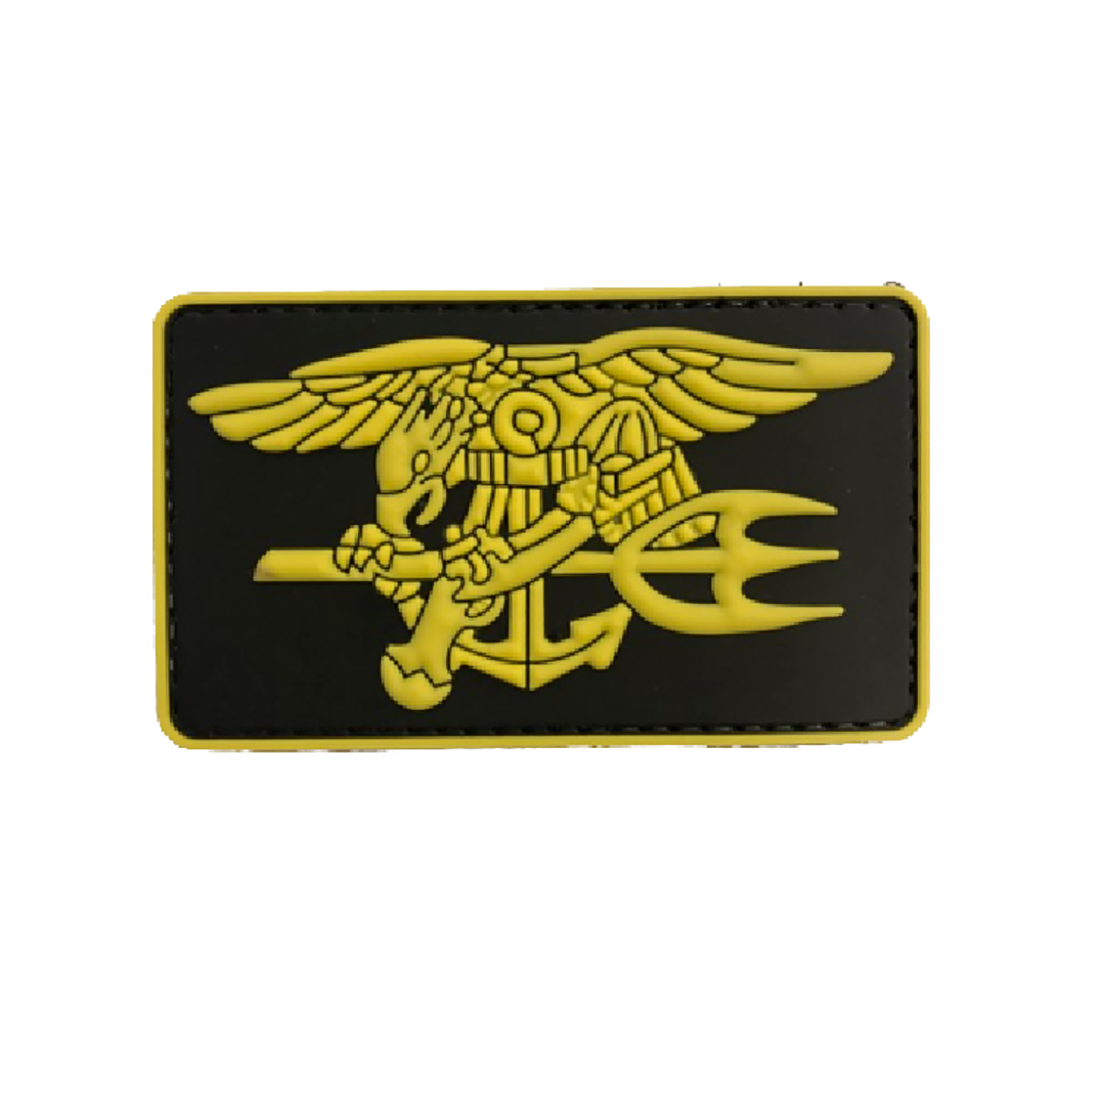 NAVY SEAL EAGLE TRIDENT Tactical Rubber Velcro Patches